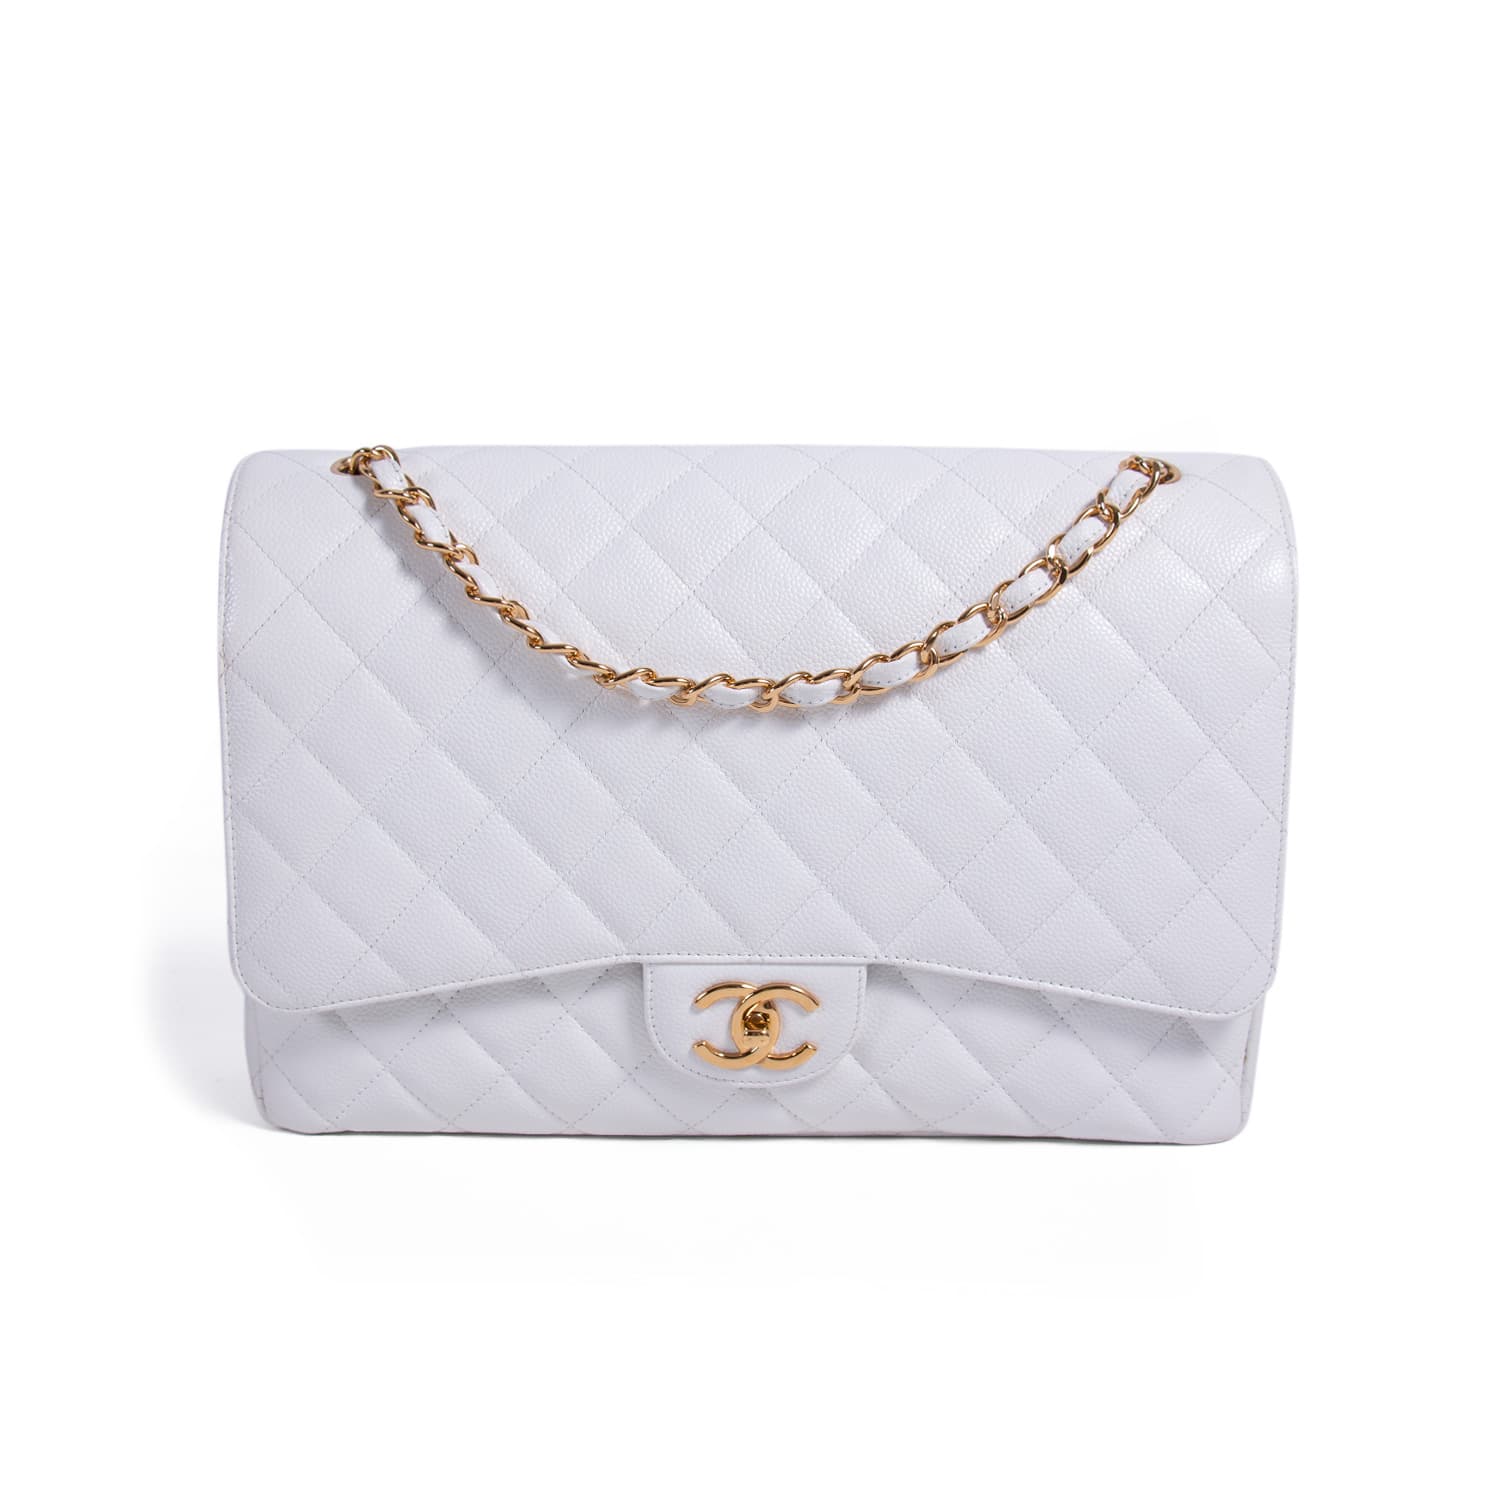 Shop authentic Chanel Classic Maxi Double Flap Bag at revogue for just ...